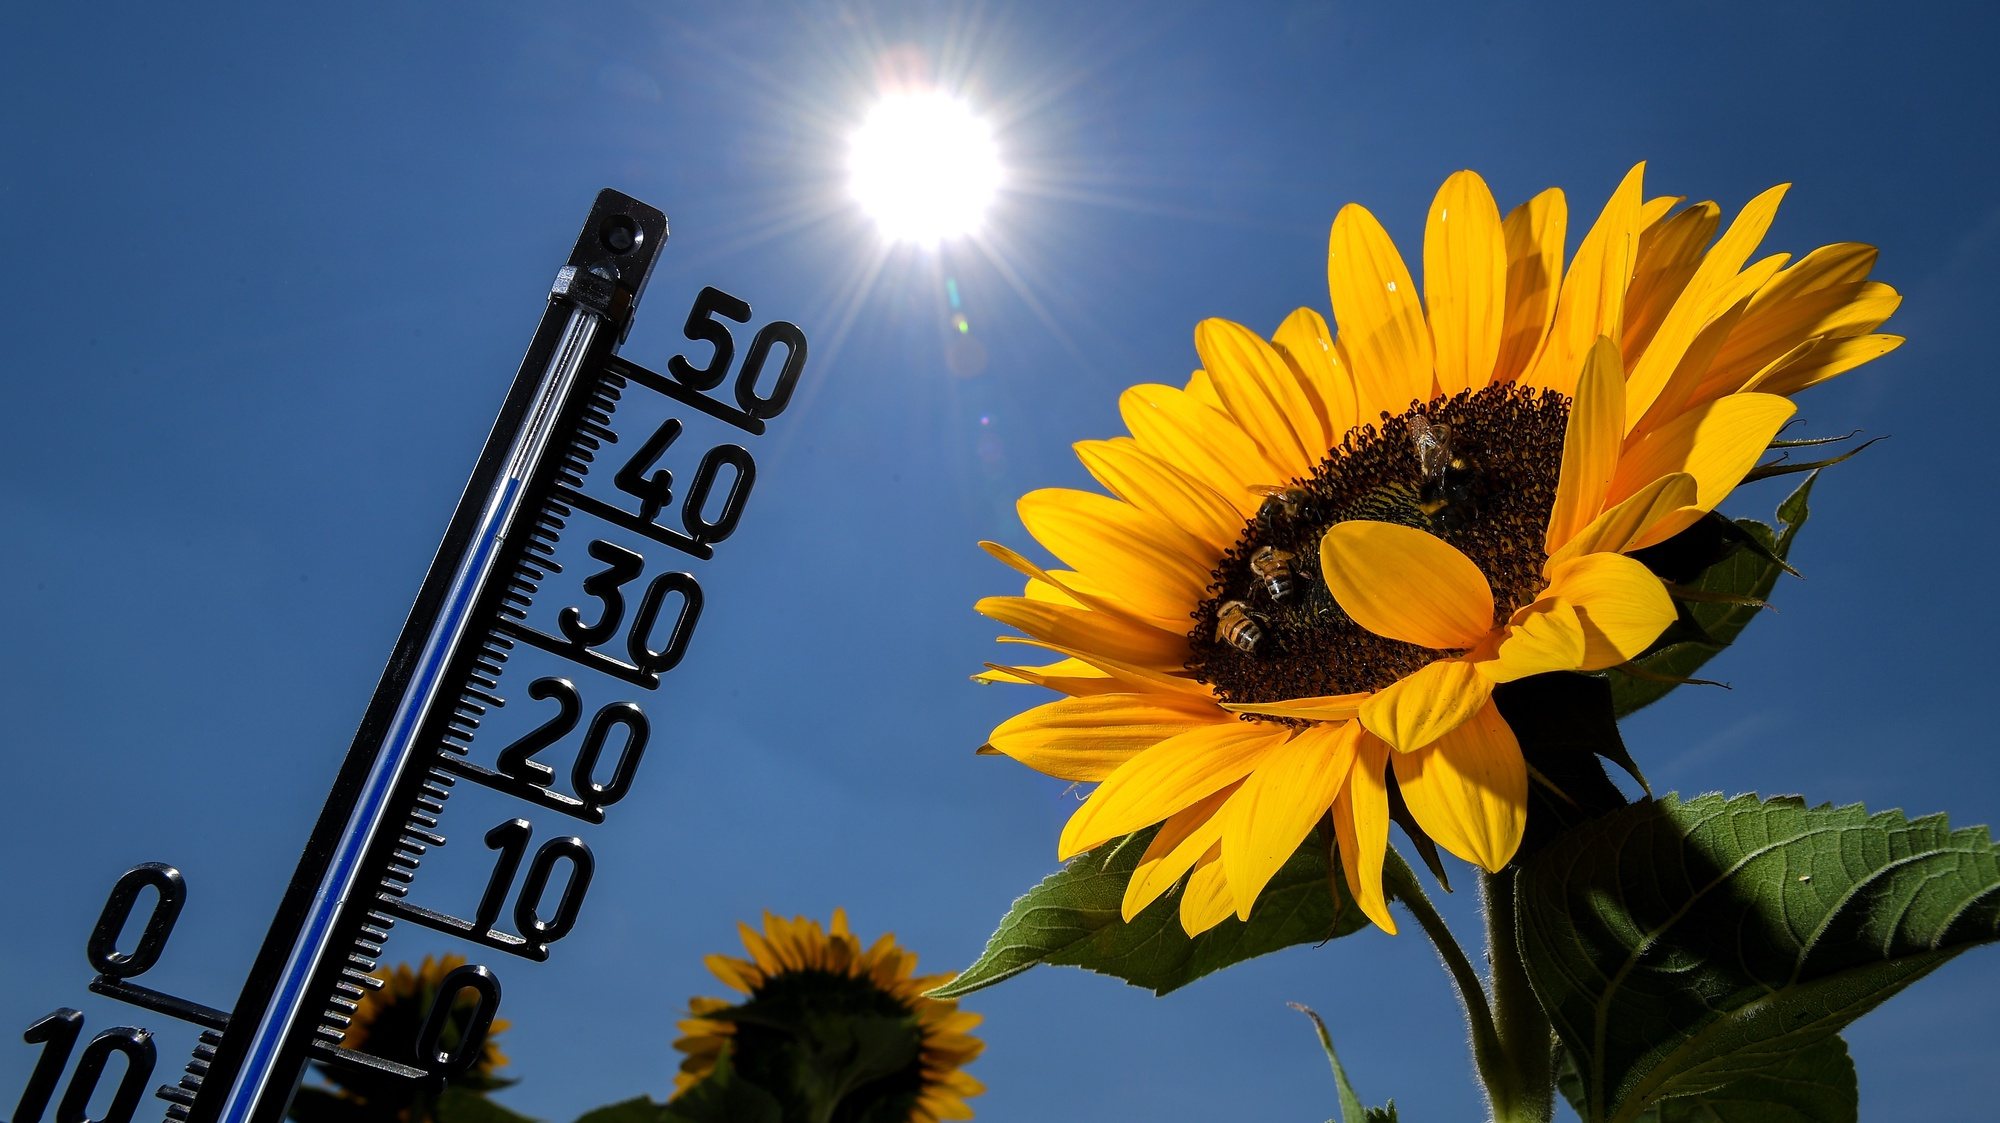 epa06913418 A thermometer among sunflowers shows an outside temperature of 39 degrees celsius in Kamp-Lintfort, Germany, 27 July 2018. According to metereologists, temperatures are expected to rise to over 35 degrees nationwide and close to 40 degrees. The German Weather Service (DWD) has issued a heat warning for large parts of Germany.  EPA/SASCHA STEINBACH